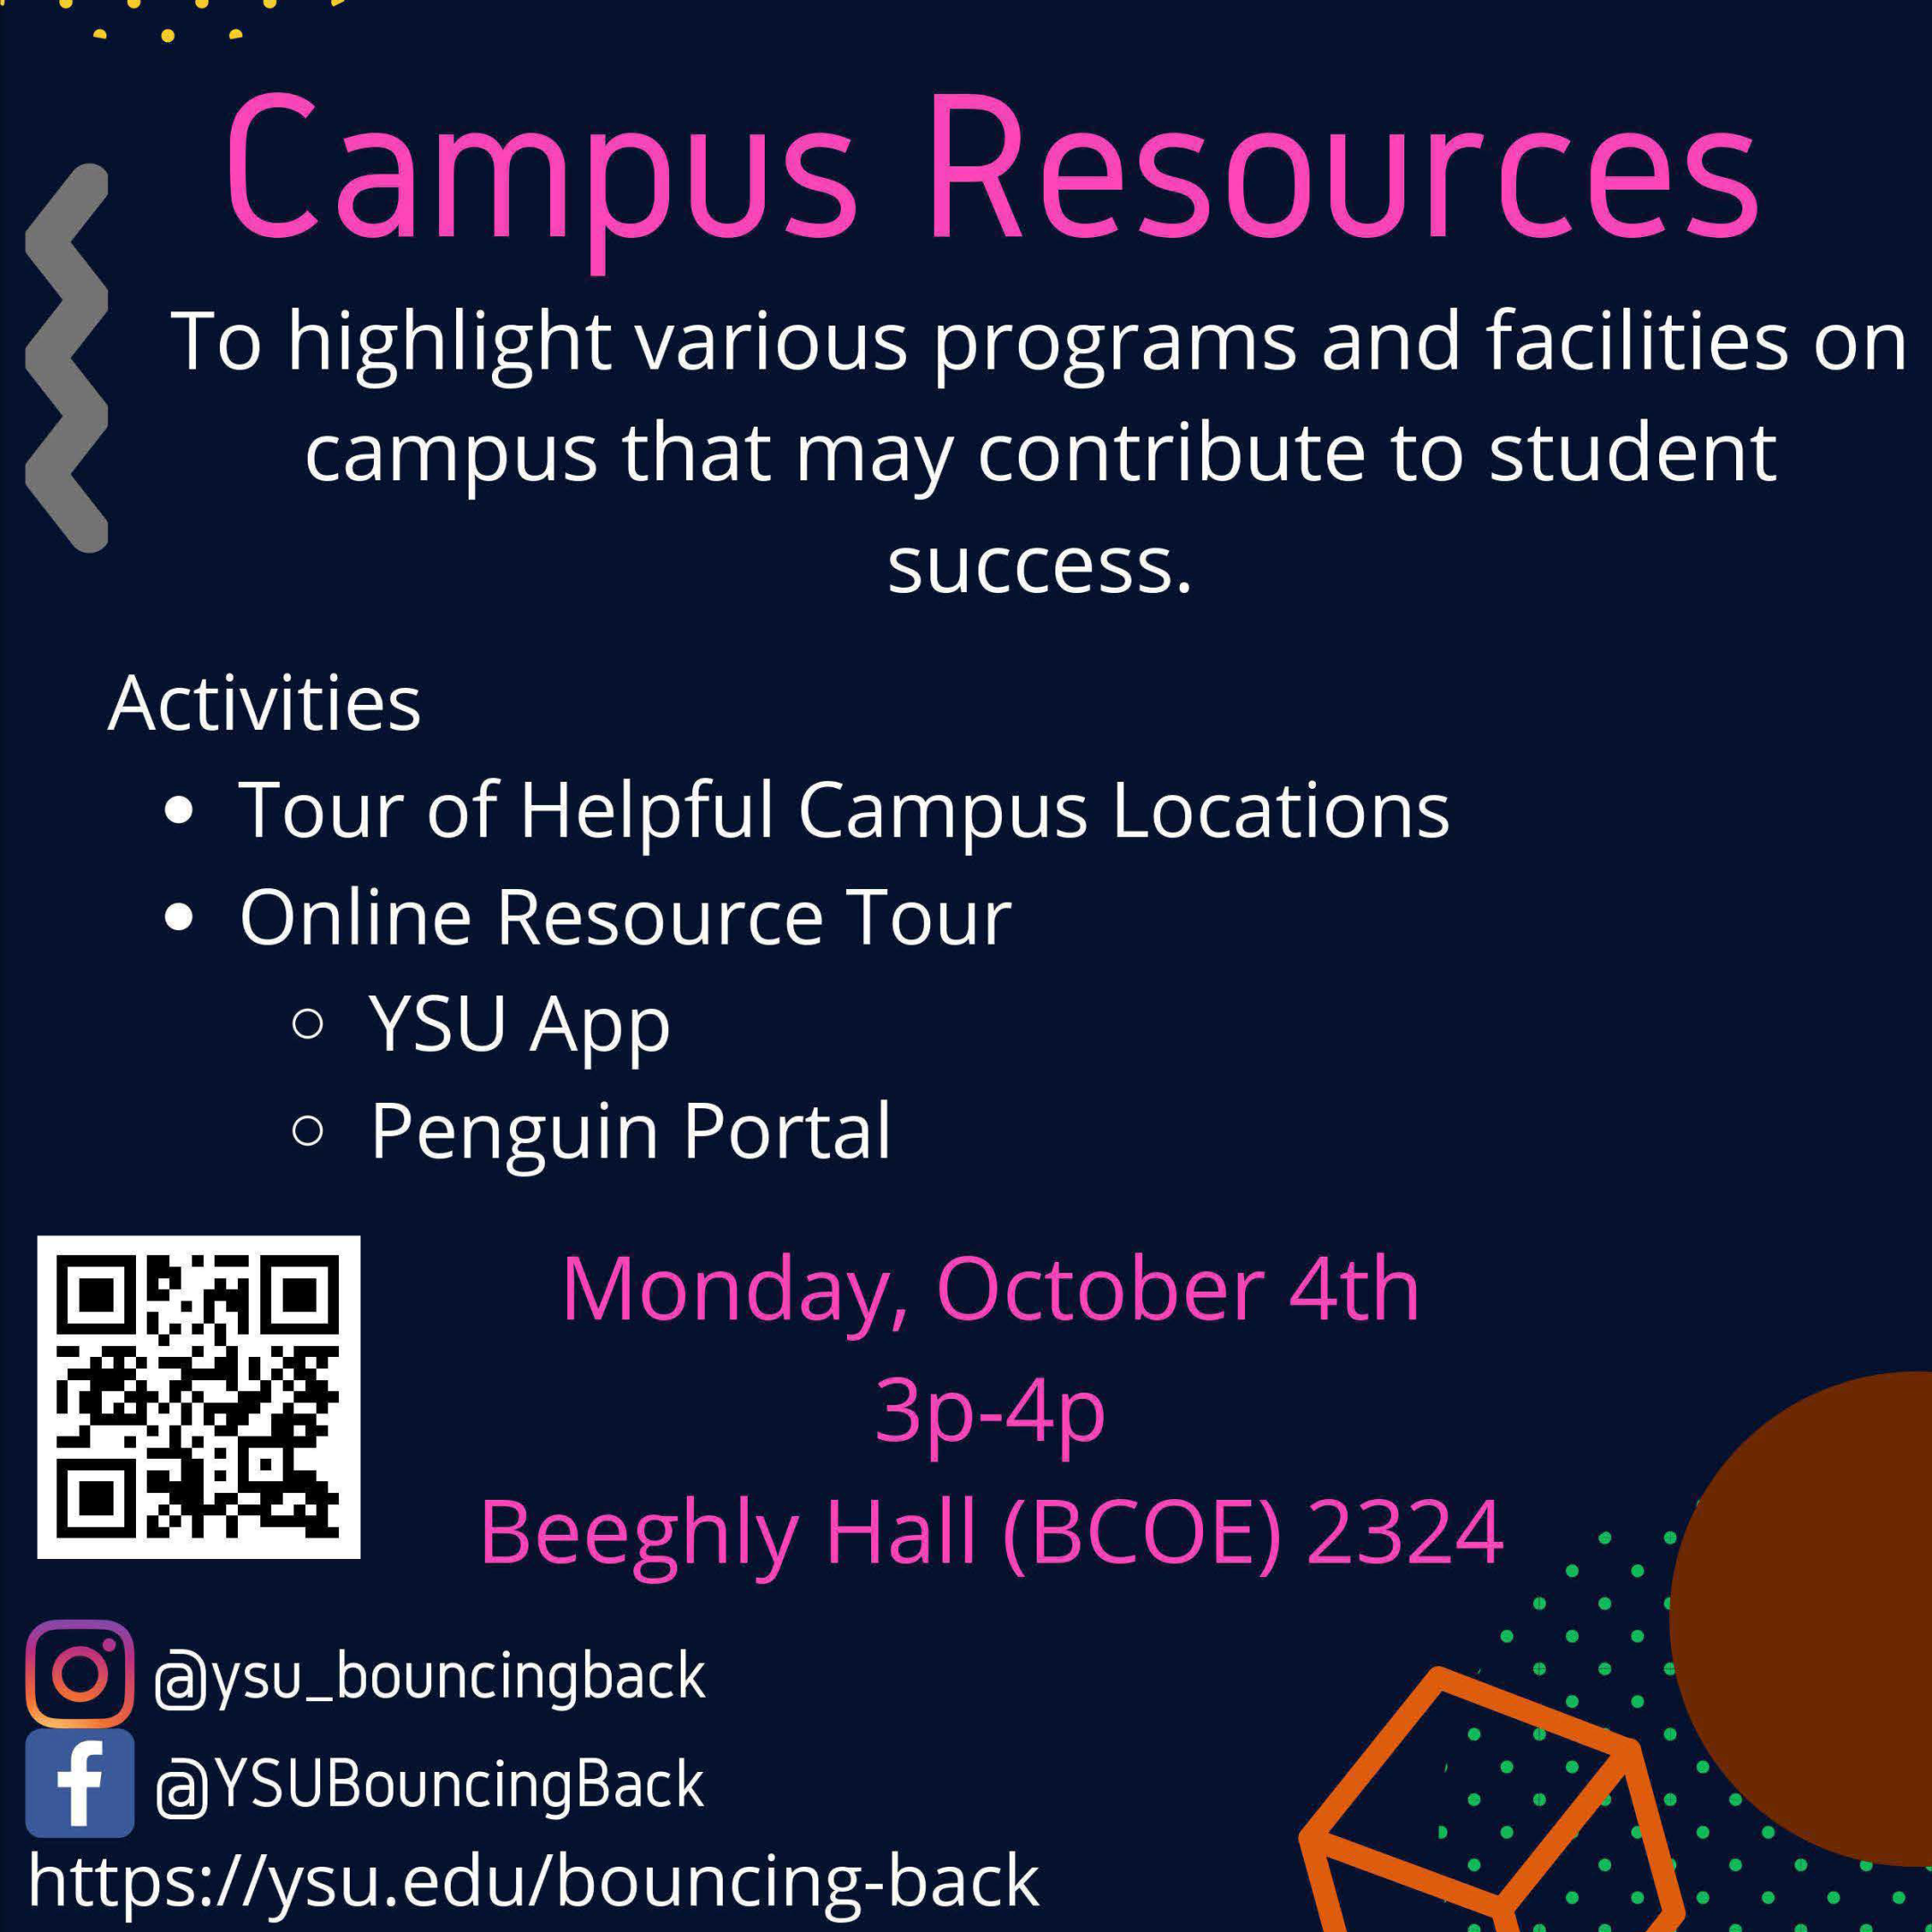 Campus Resources event from October 2021